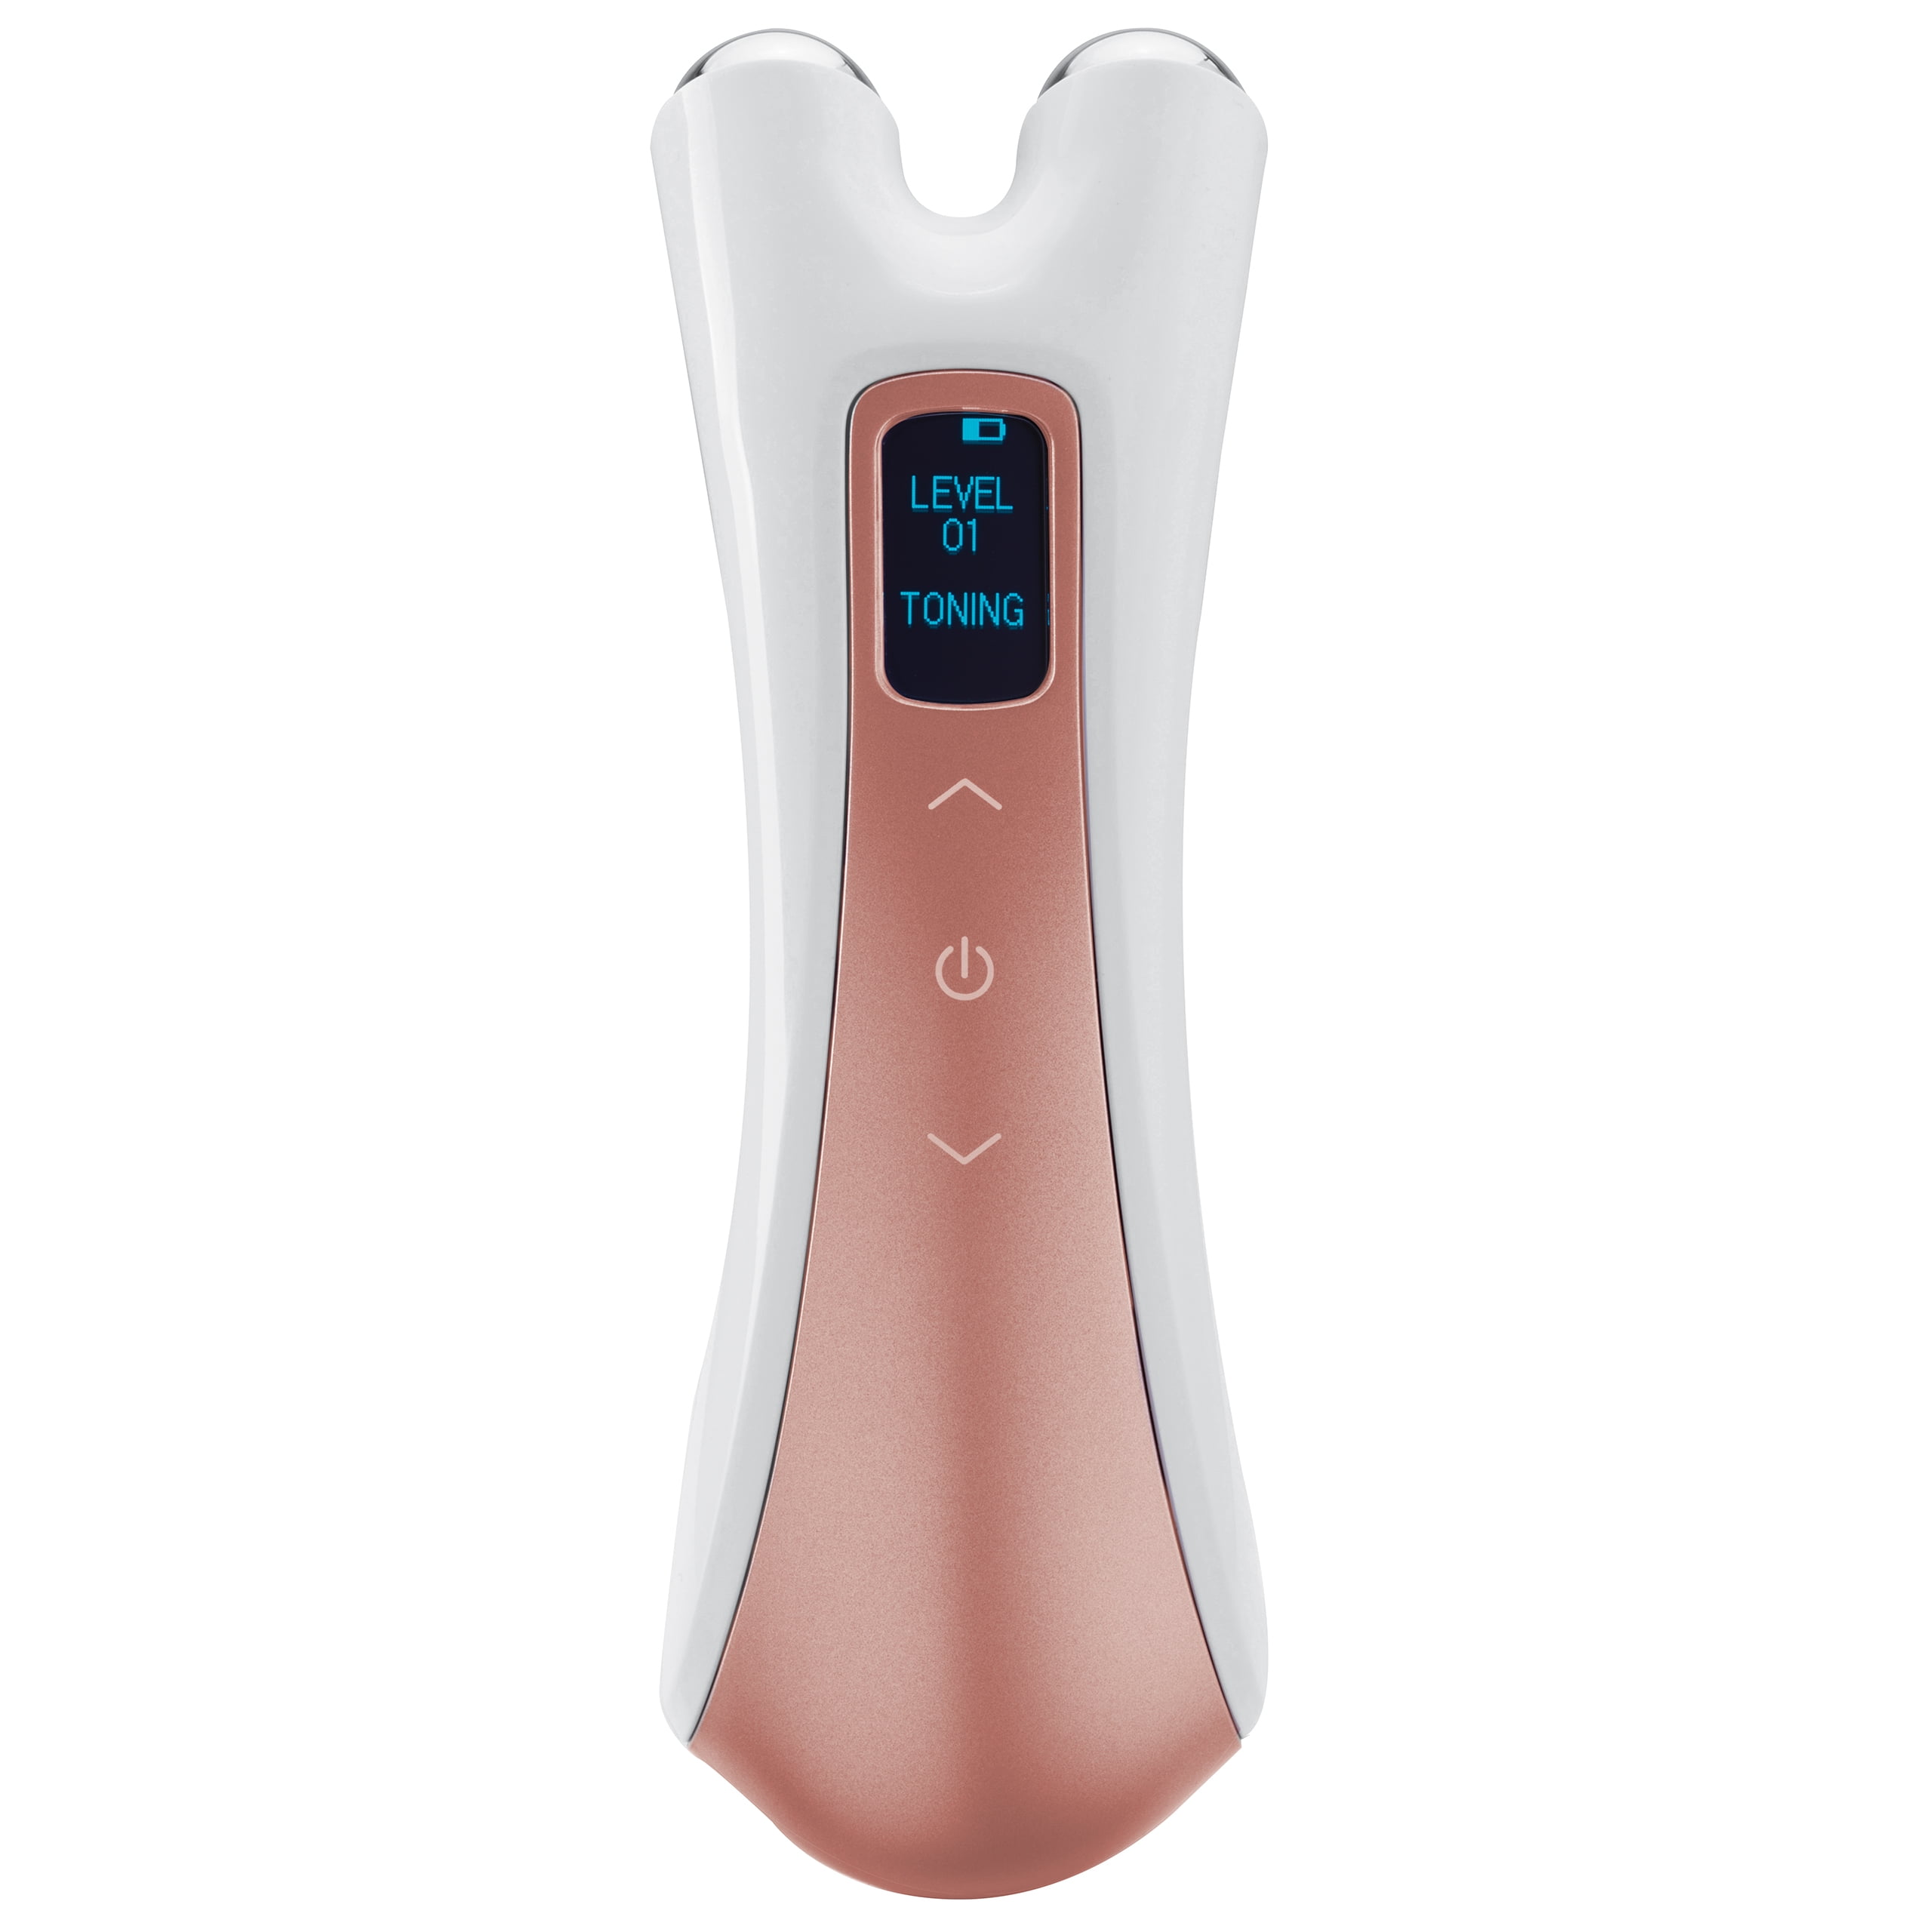 Trophy Skin RejuvatoneMD High Frequency Facial Machine - Spa